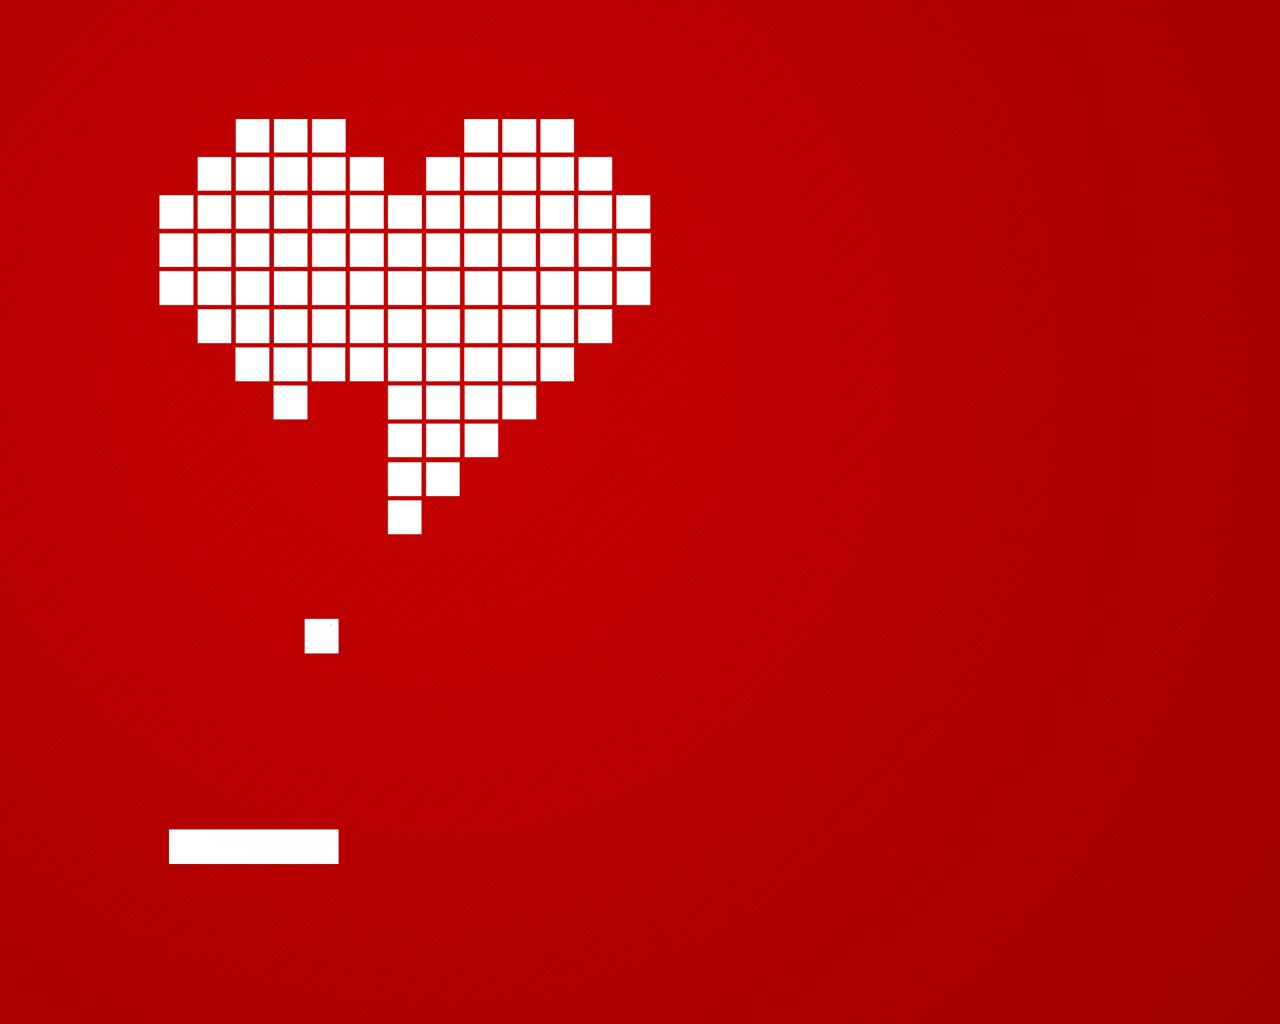 Heart Gaming for 1280 x 1024 resolution